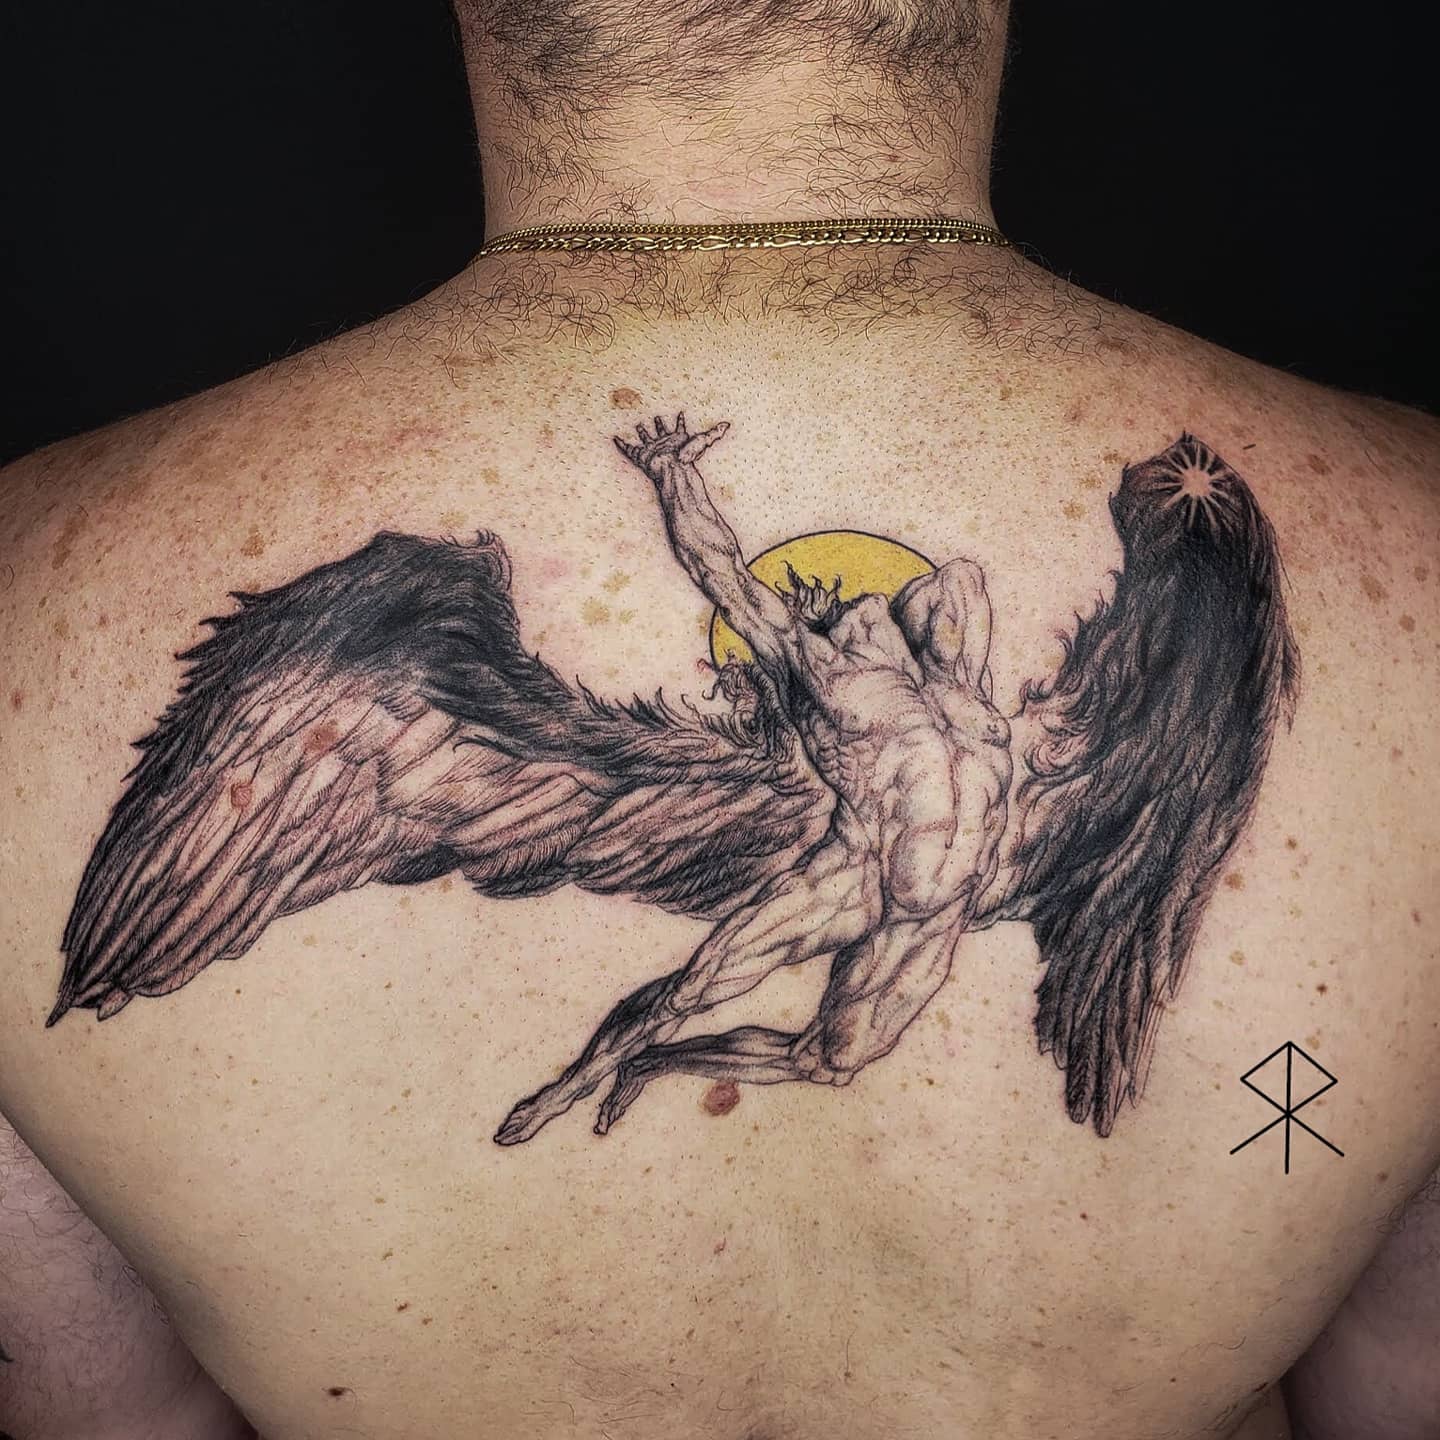 Icarus by Mike Adams at Homestead Tattoo in Frederick MD  rtattoos